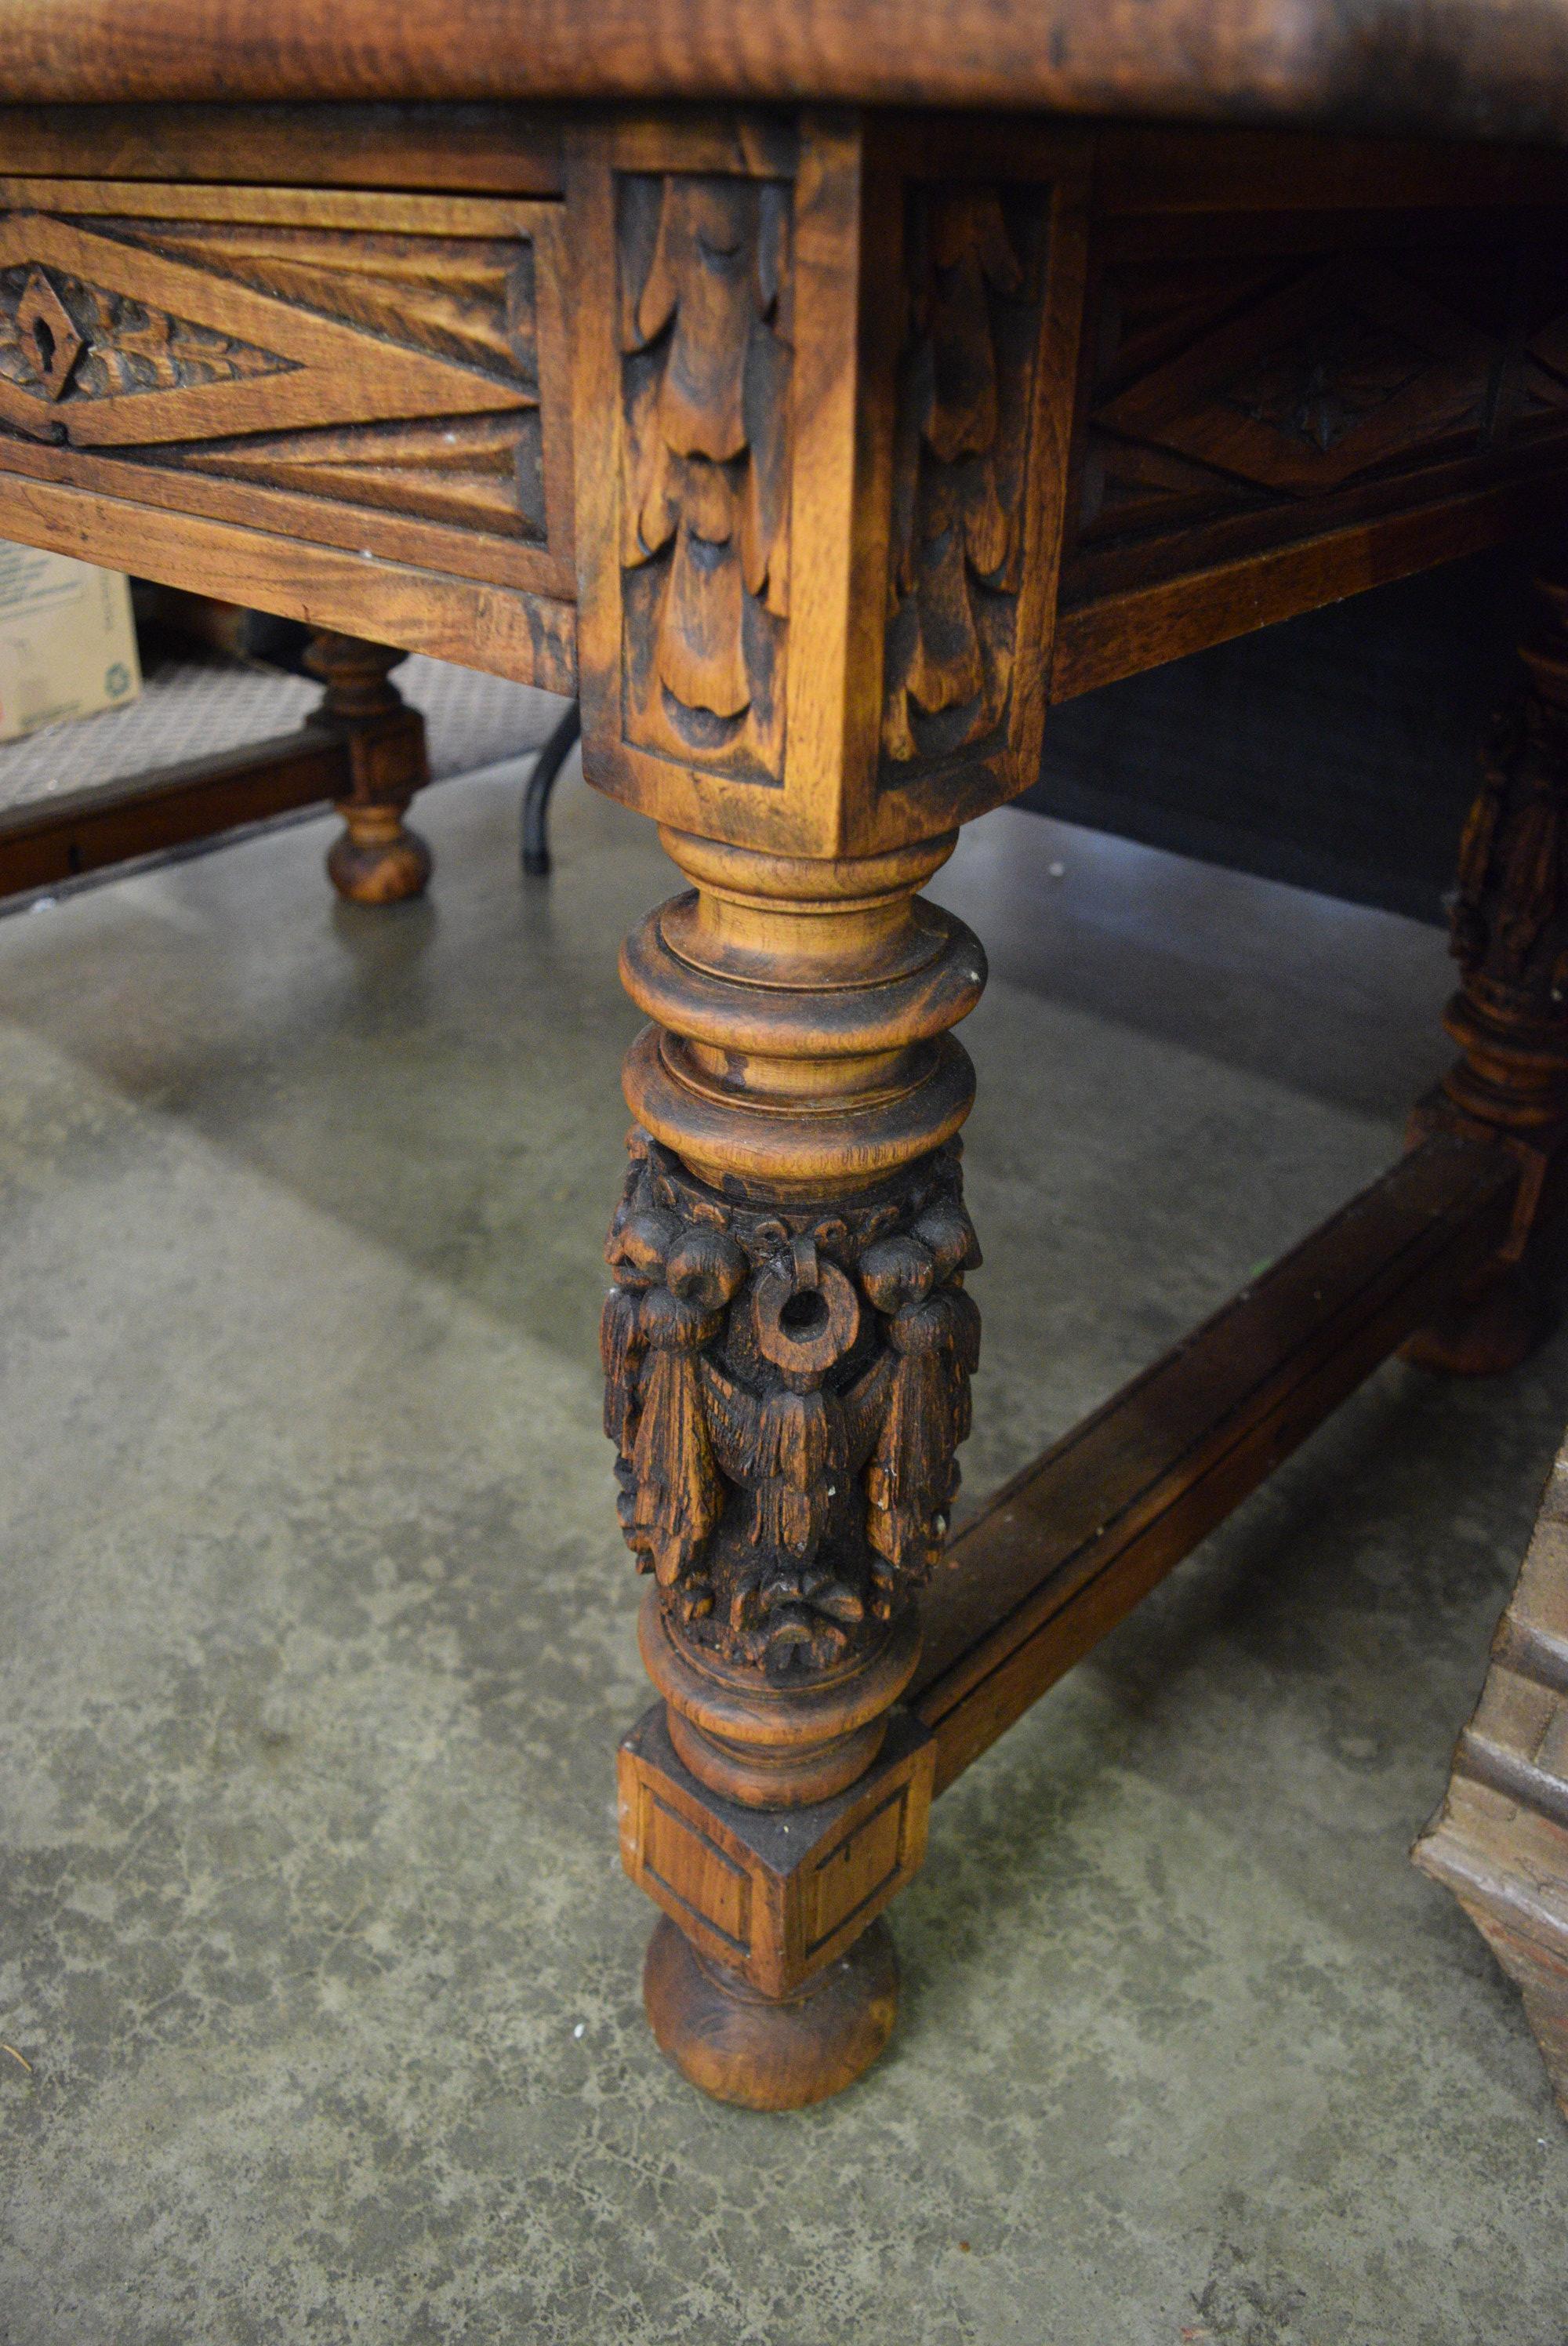 BEAUTIFUL HANDCARVED WOODEN TABLE!